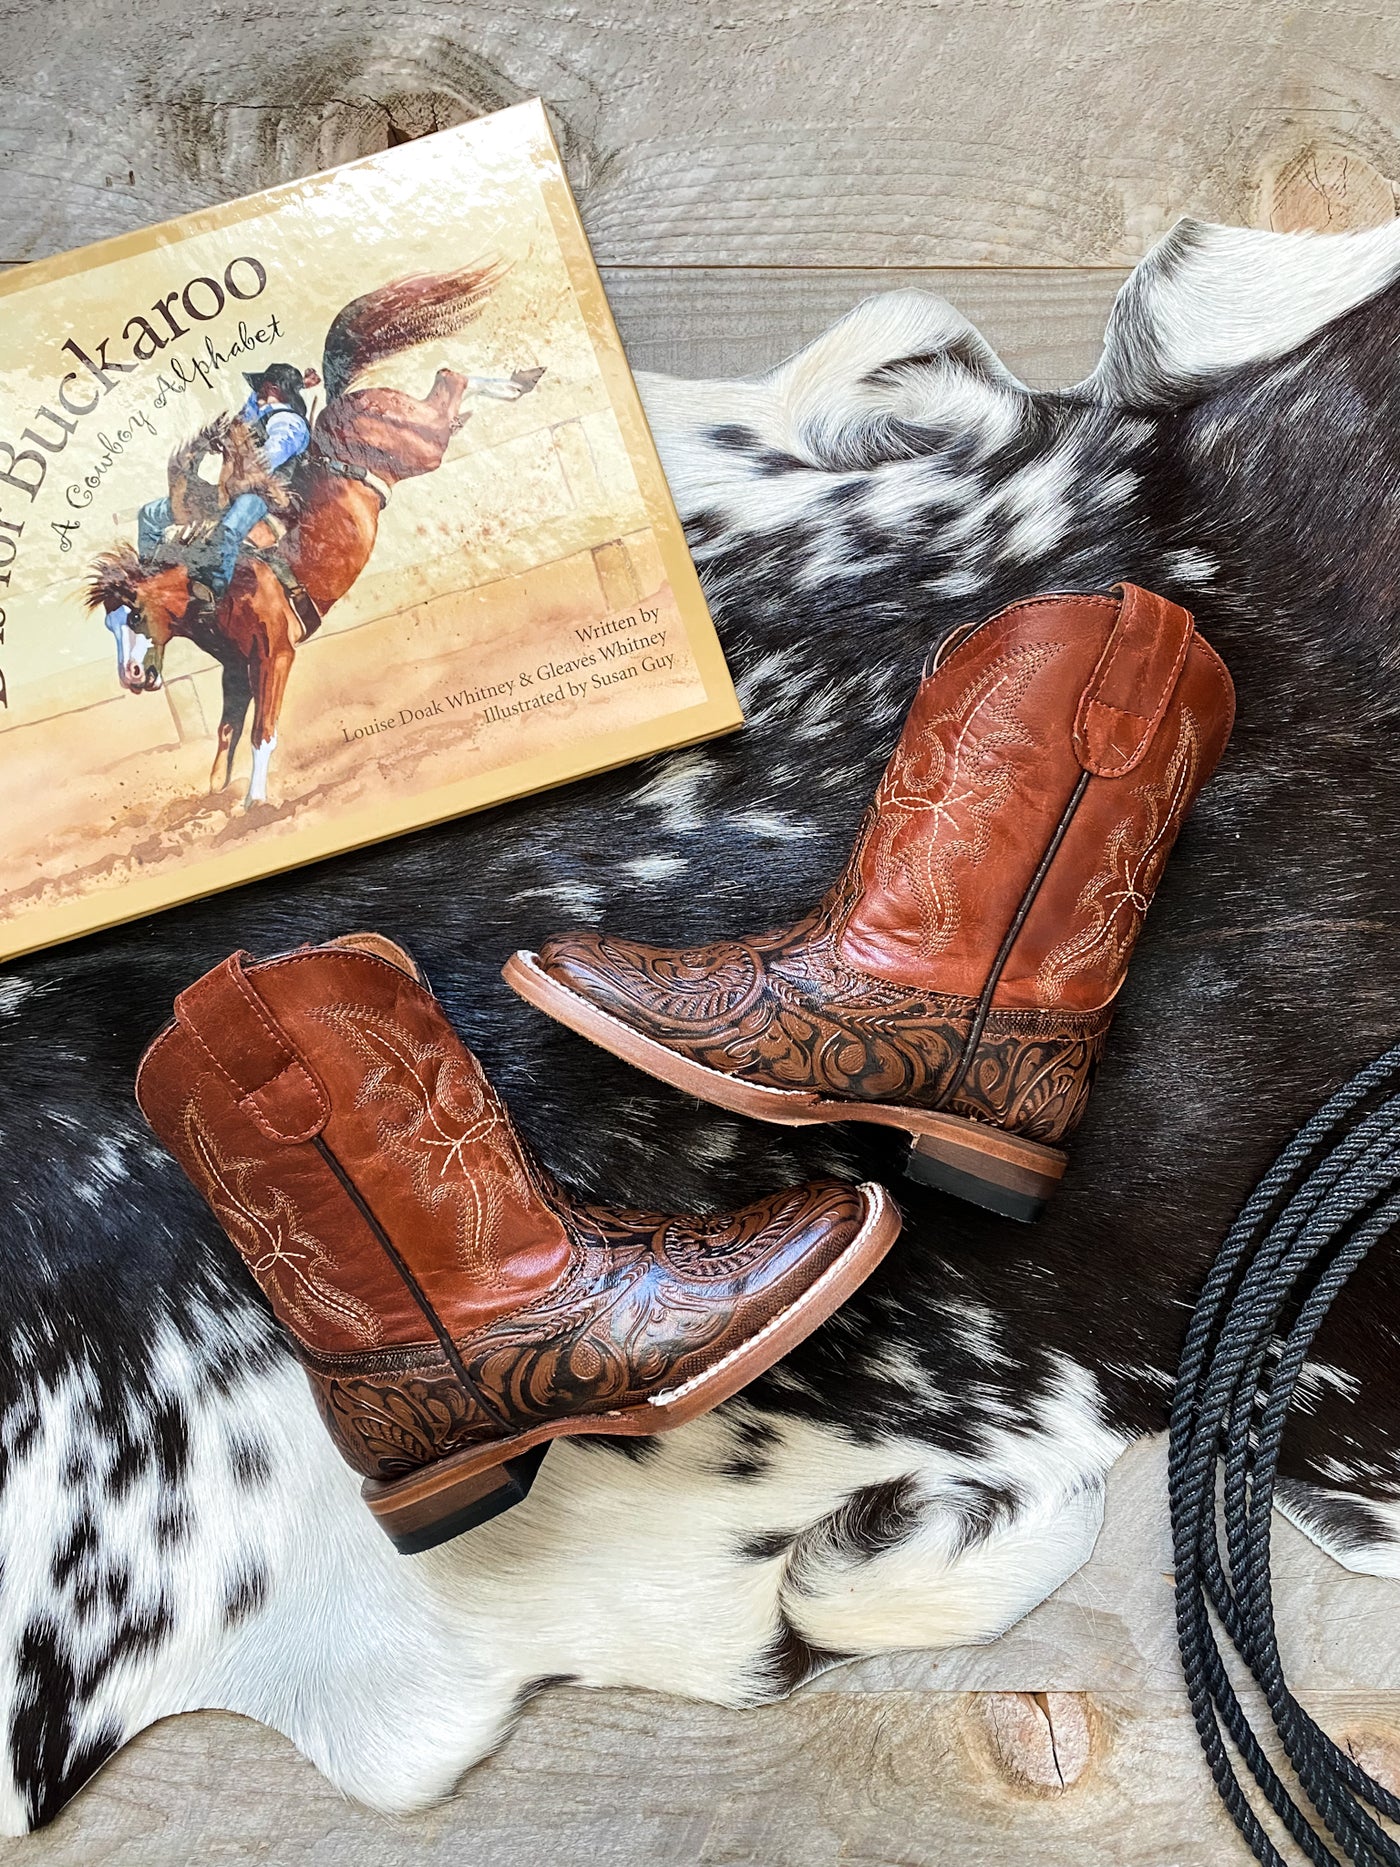 The Sawyer Boots